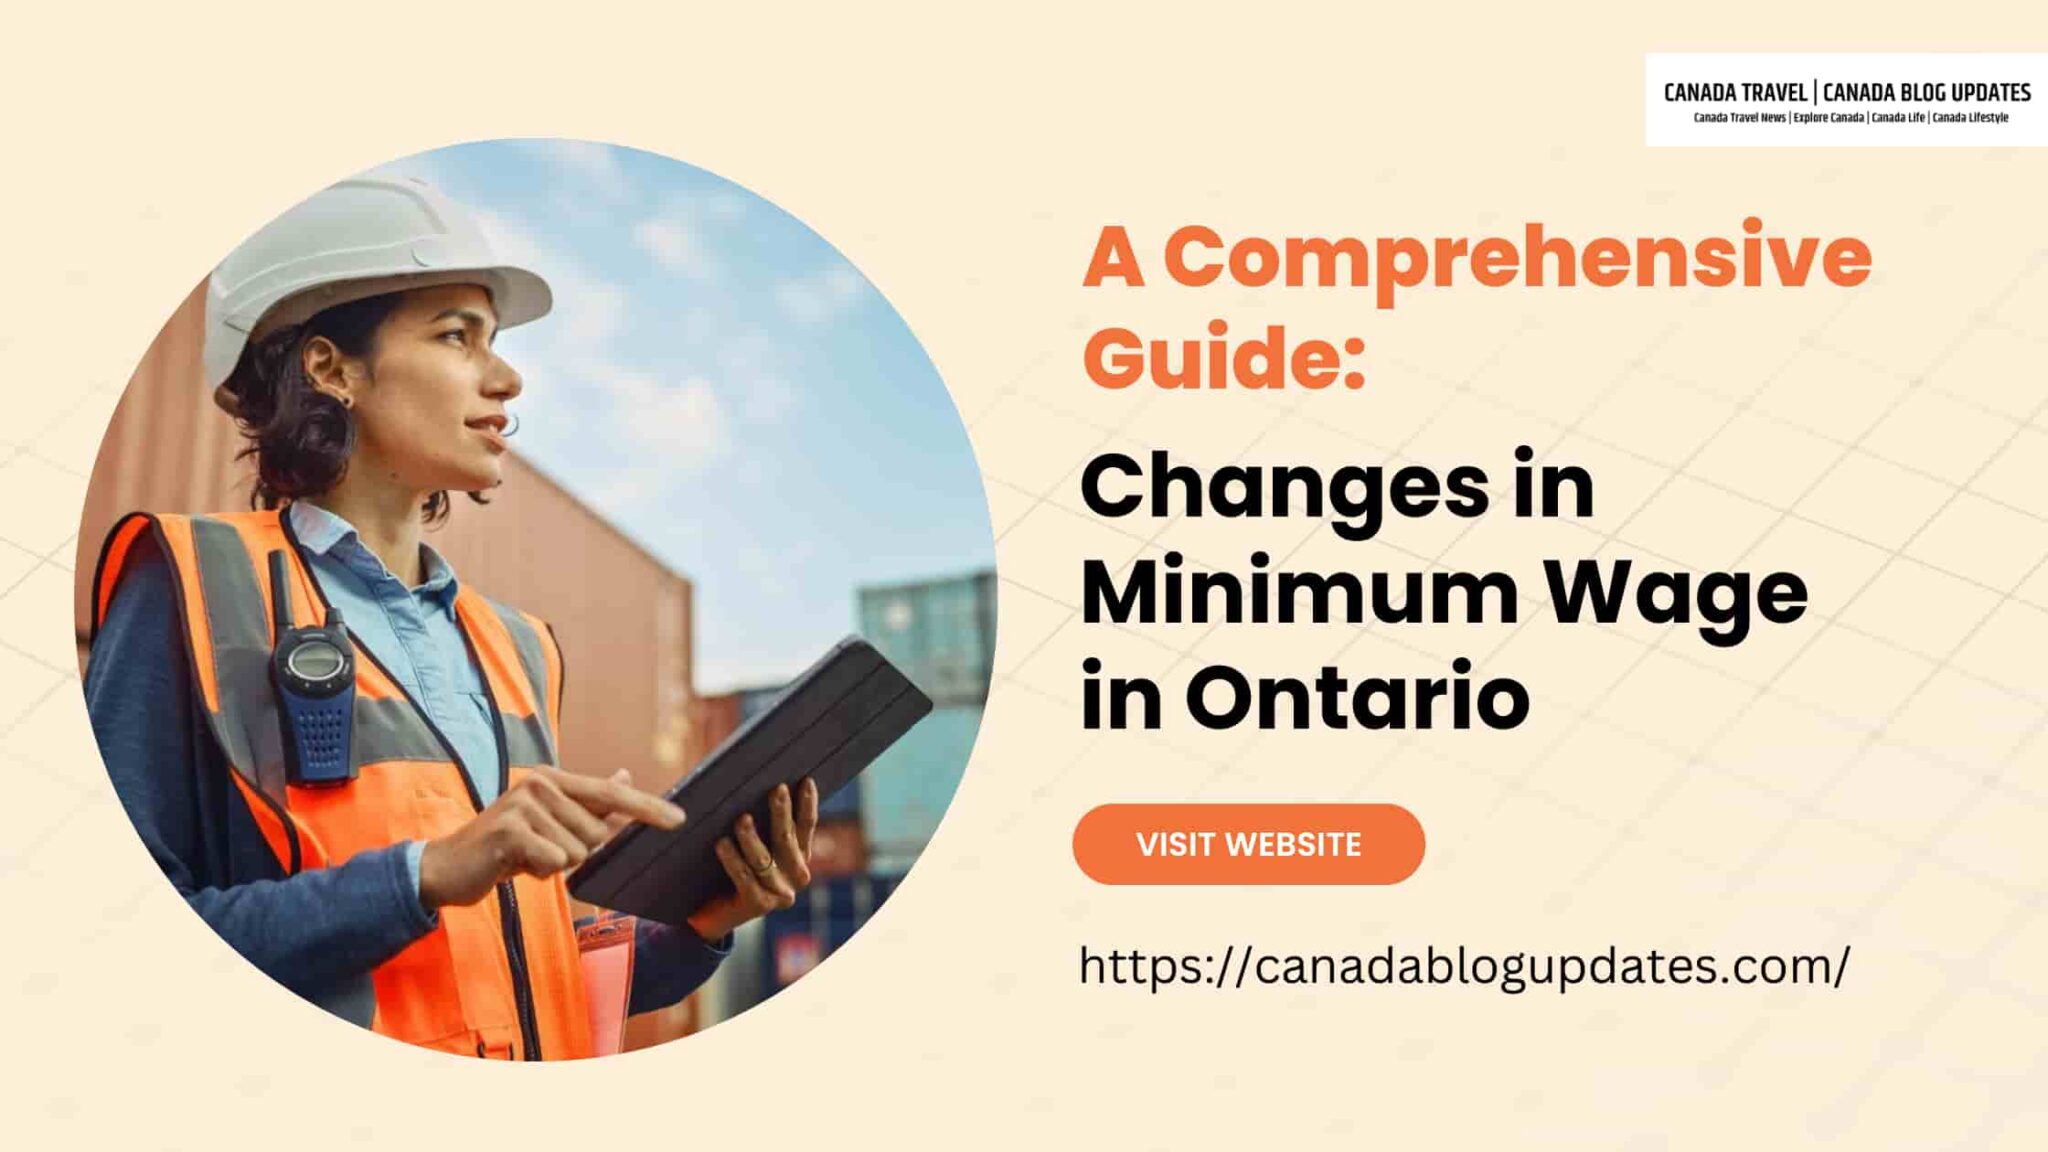 A Comprehensive Guide Changes in Minimum Wage in Ontario